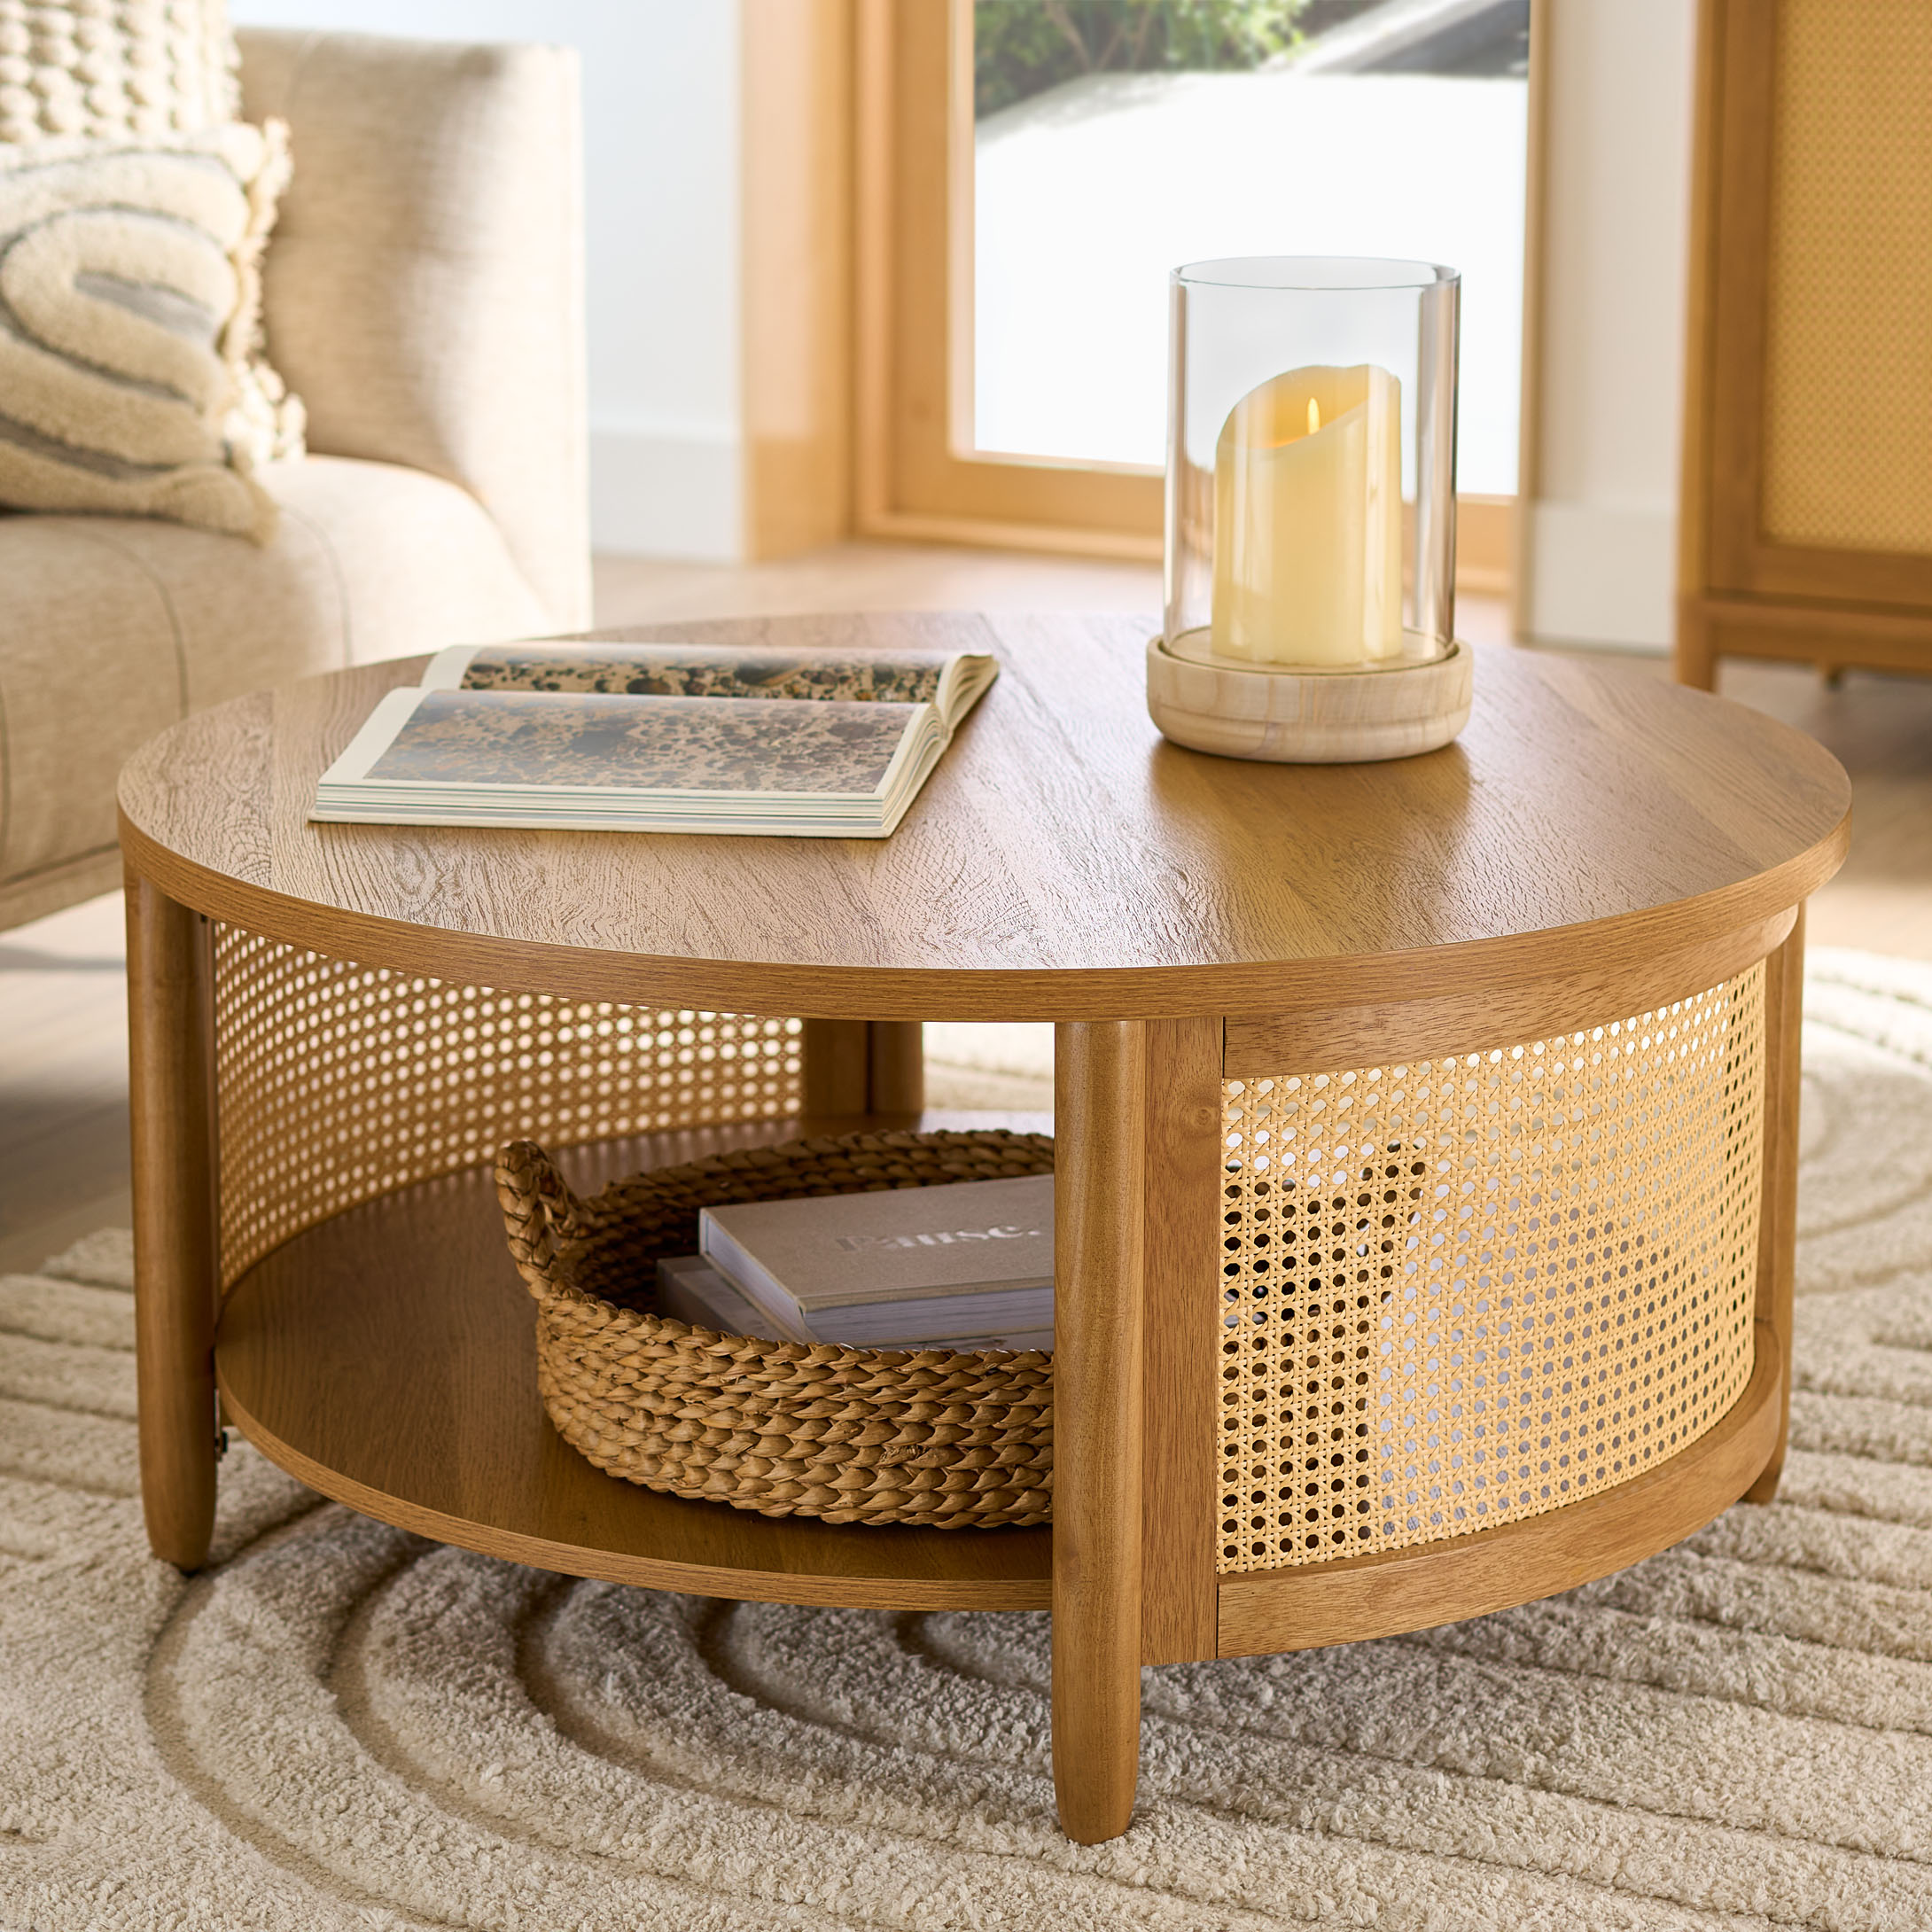 Better Homes & Gardens Springwood Caning Coffee Table, Light Honey Finish - image 1 of 9